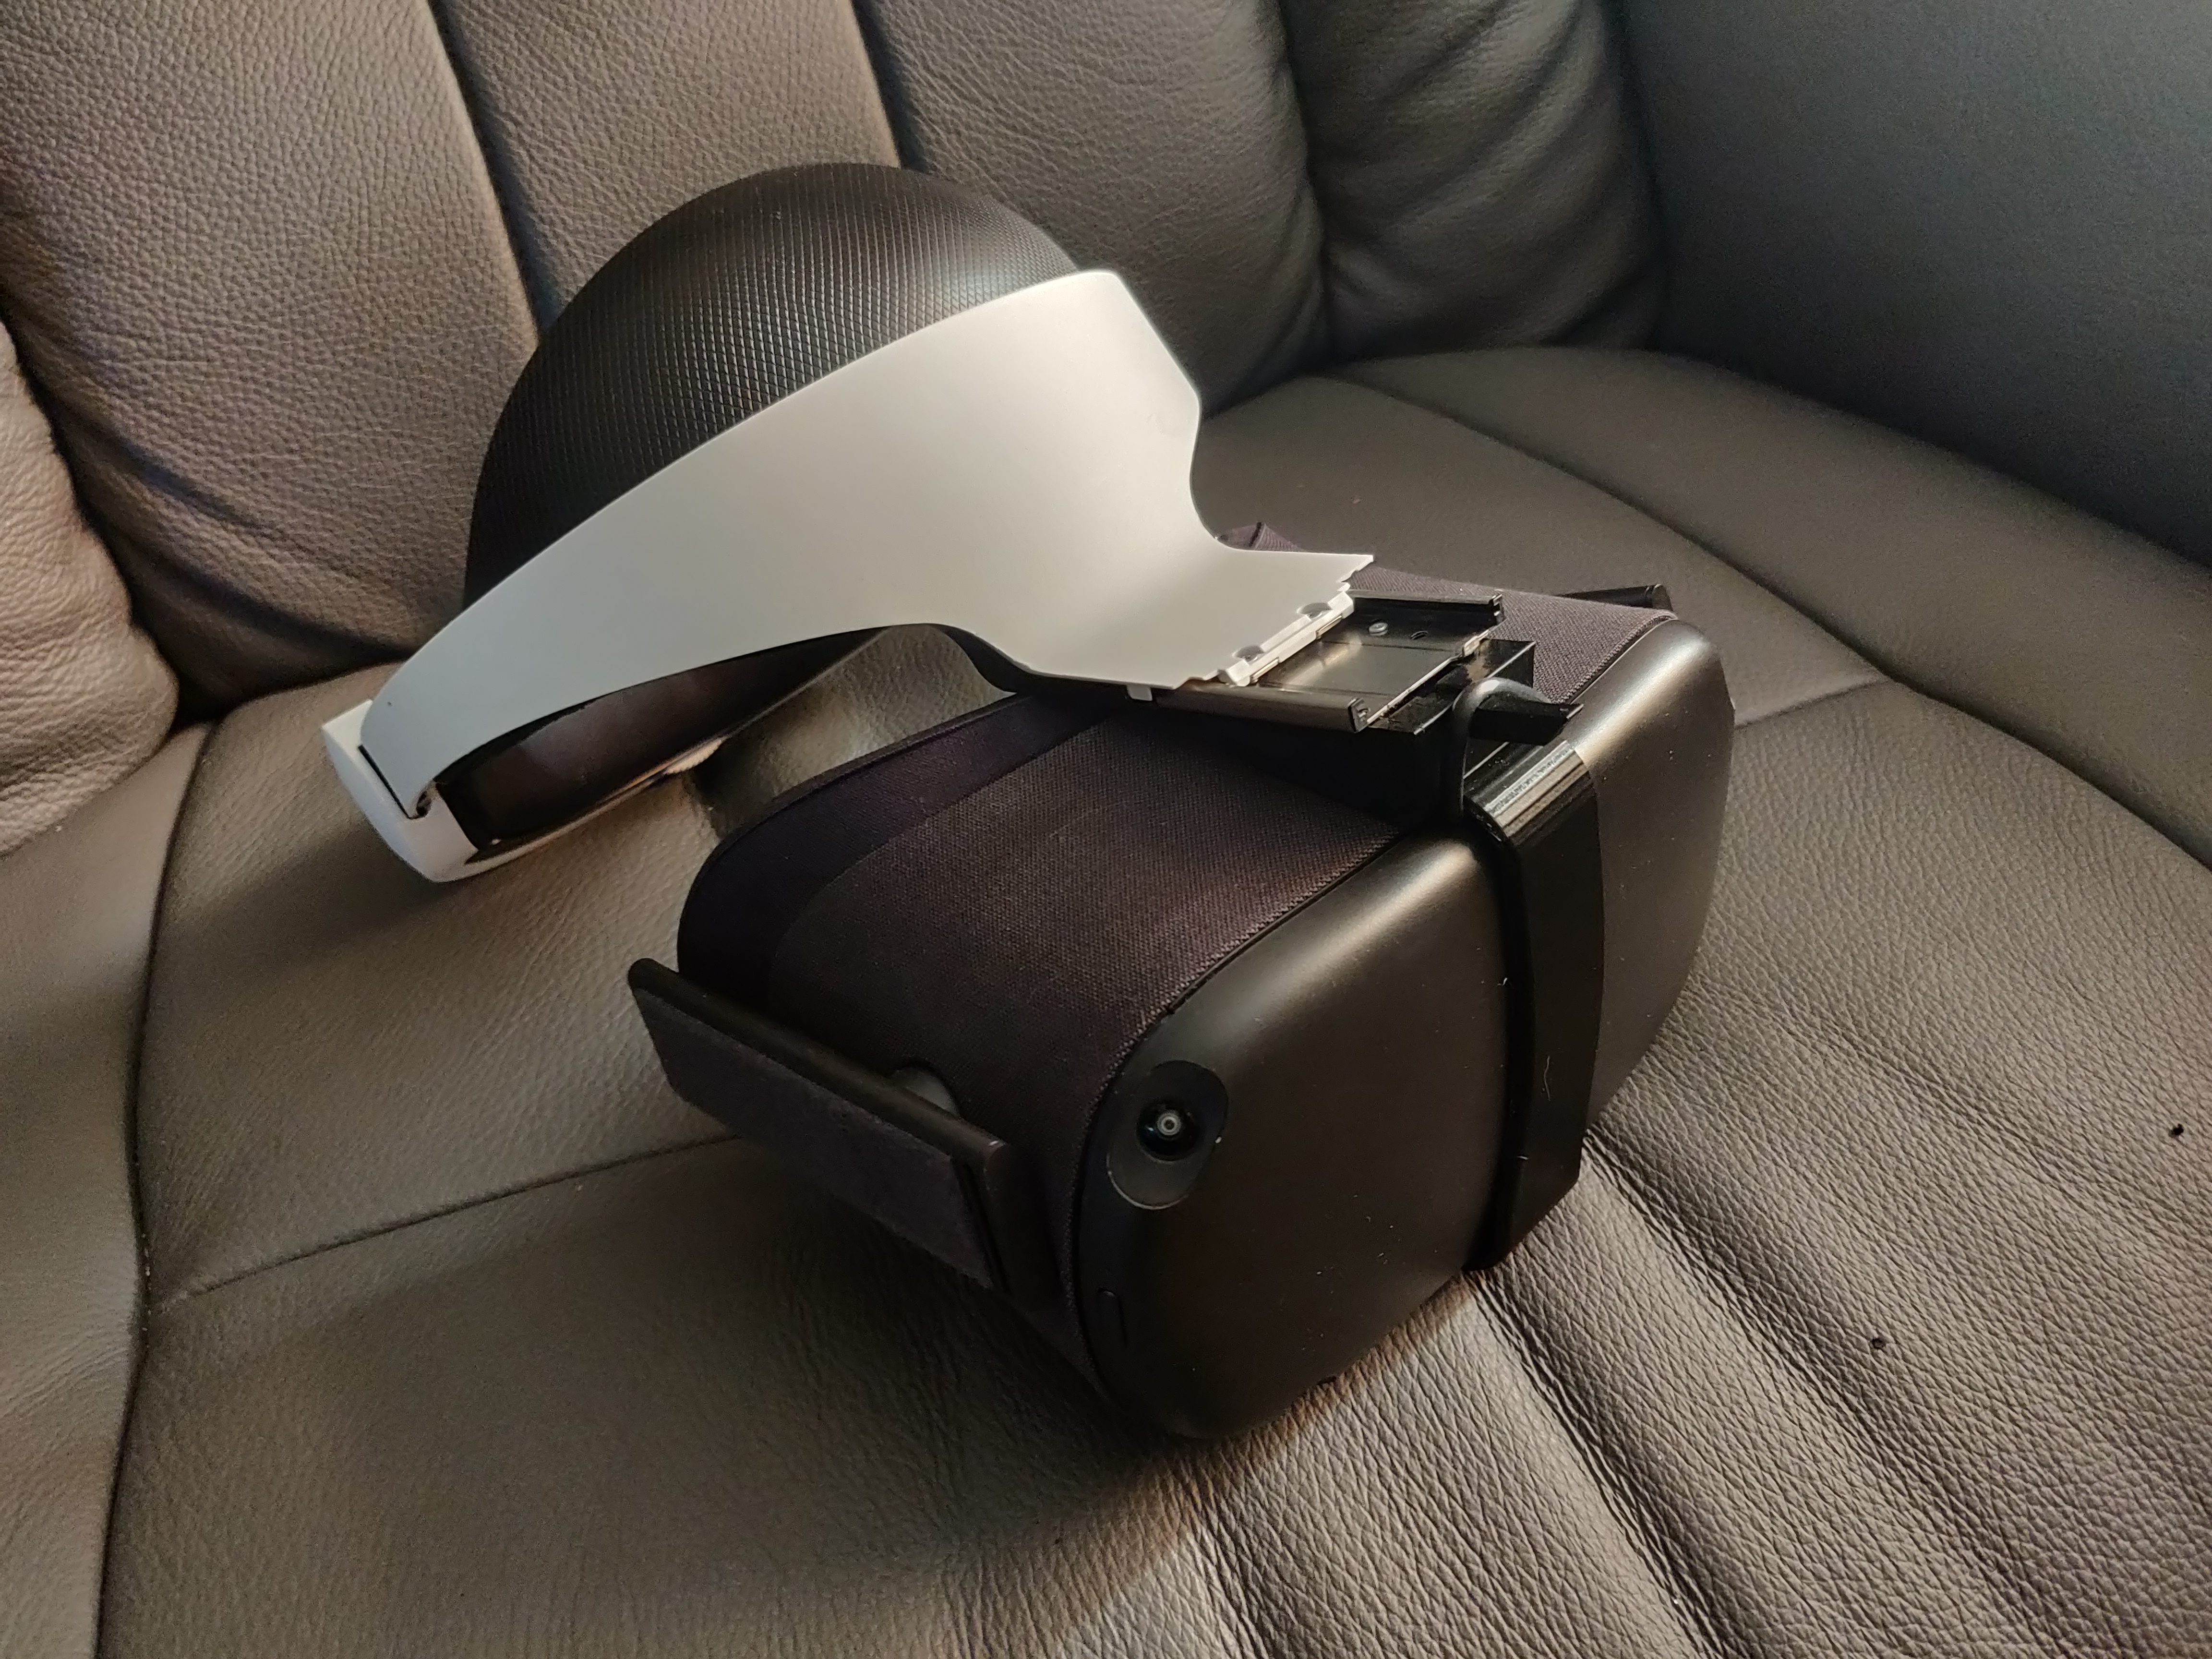 what's better oculus quest or psvr